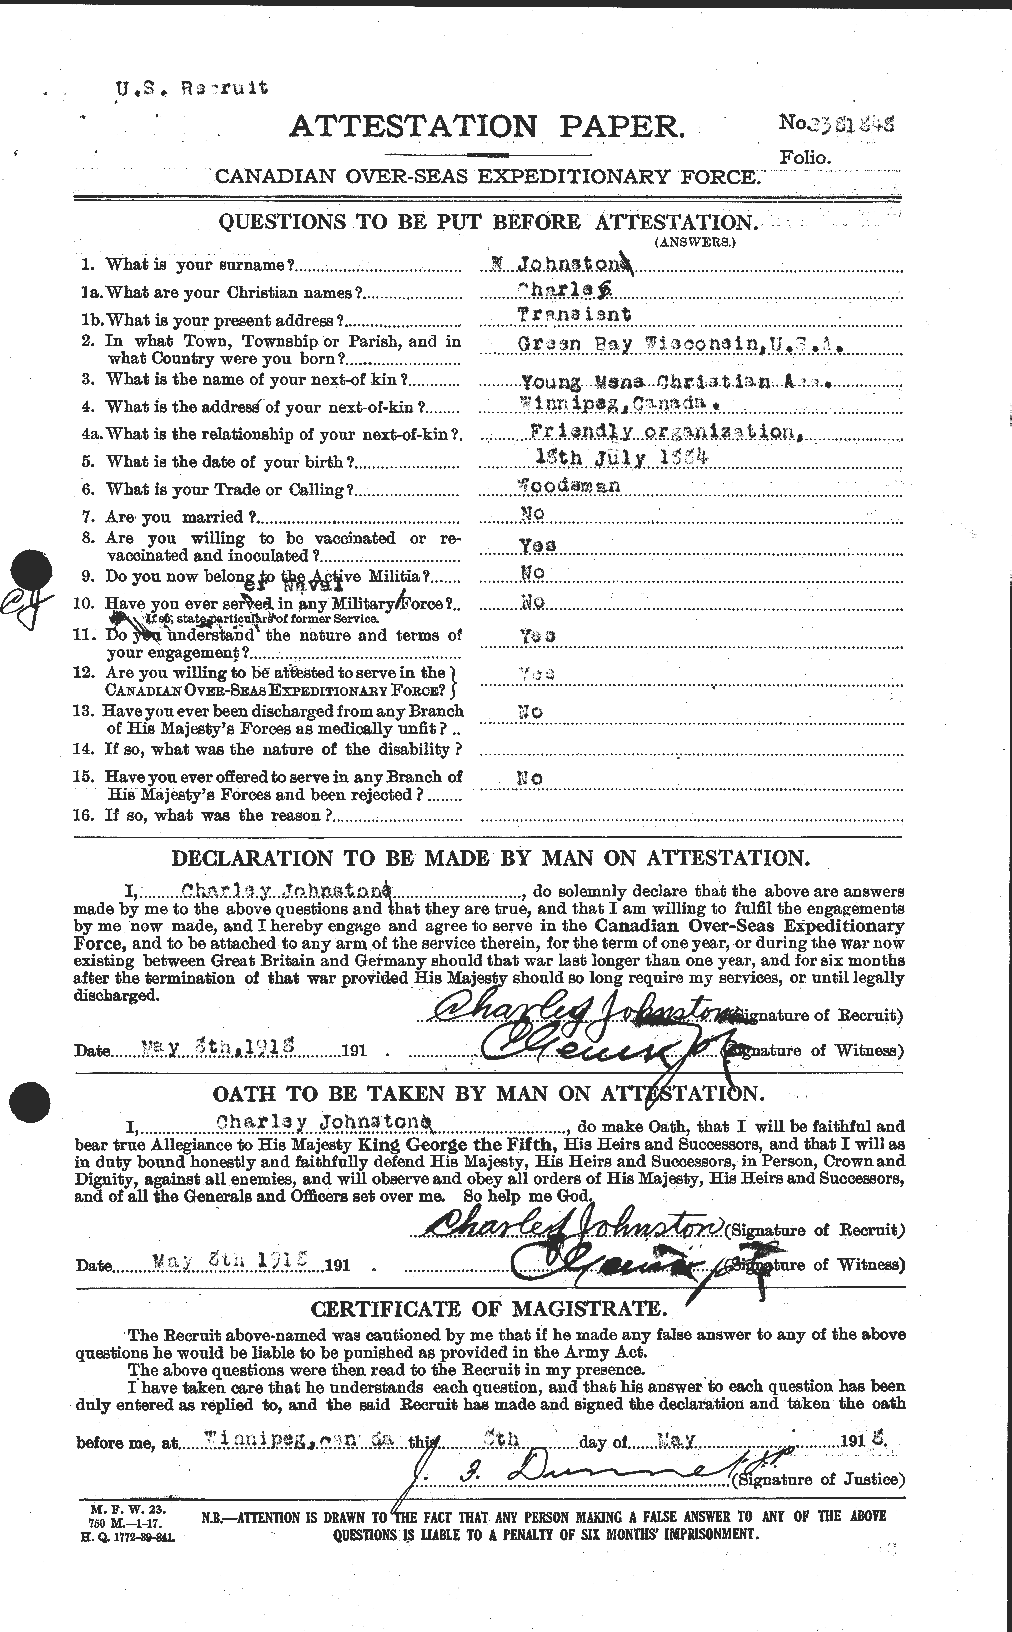 Personnel Records of the First World War - CEF 423087a